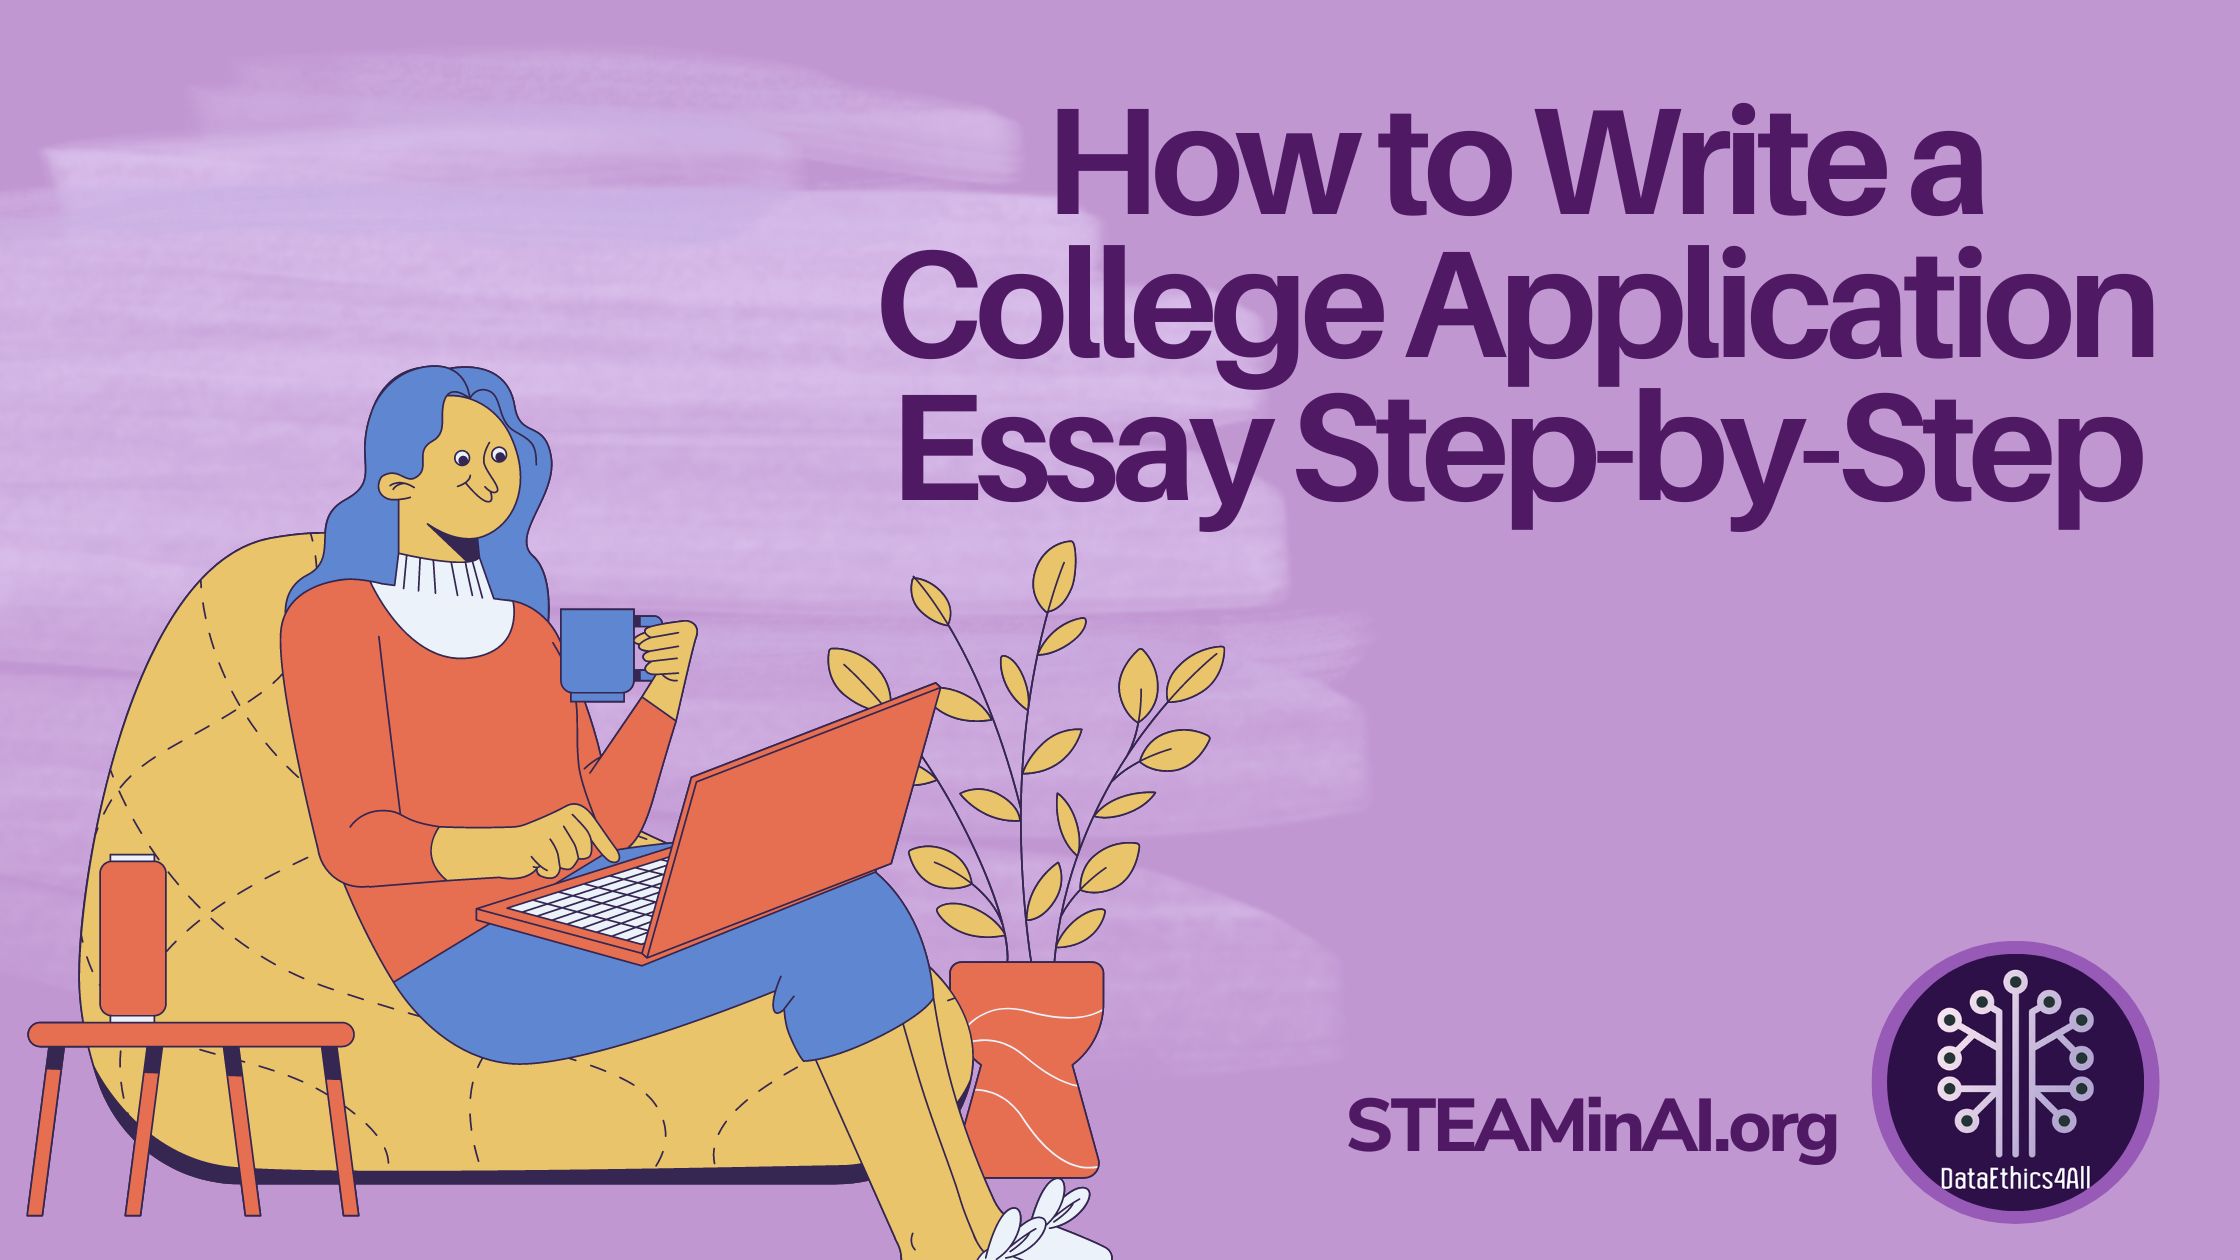 STEAM in AI How to Write a College Application Essay Step by Step